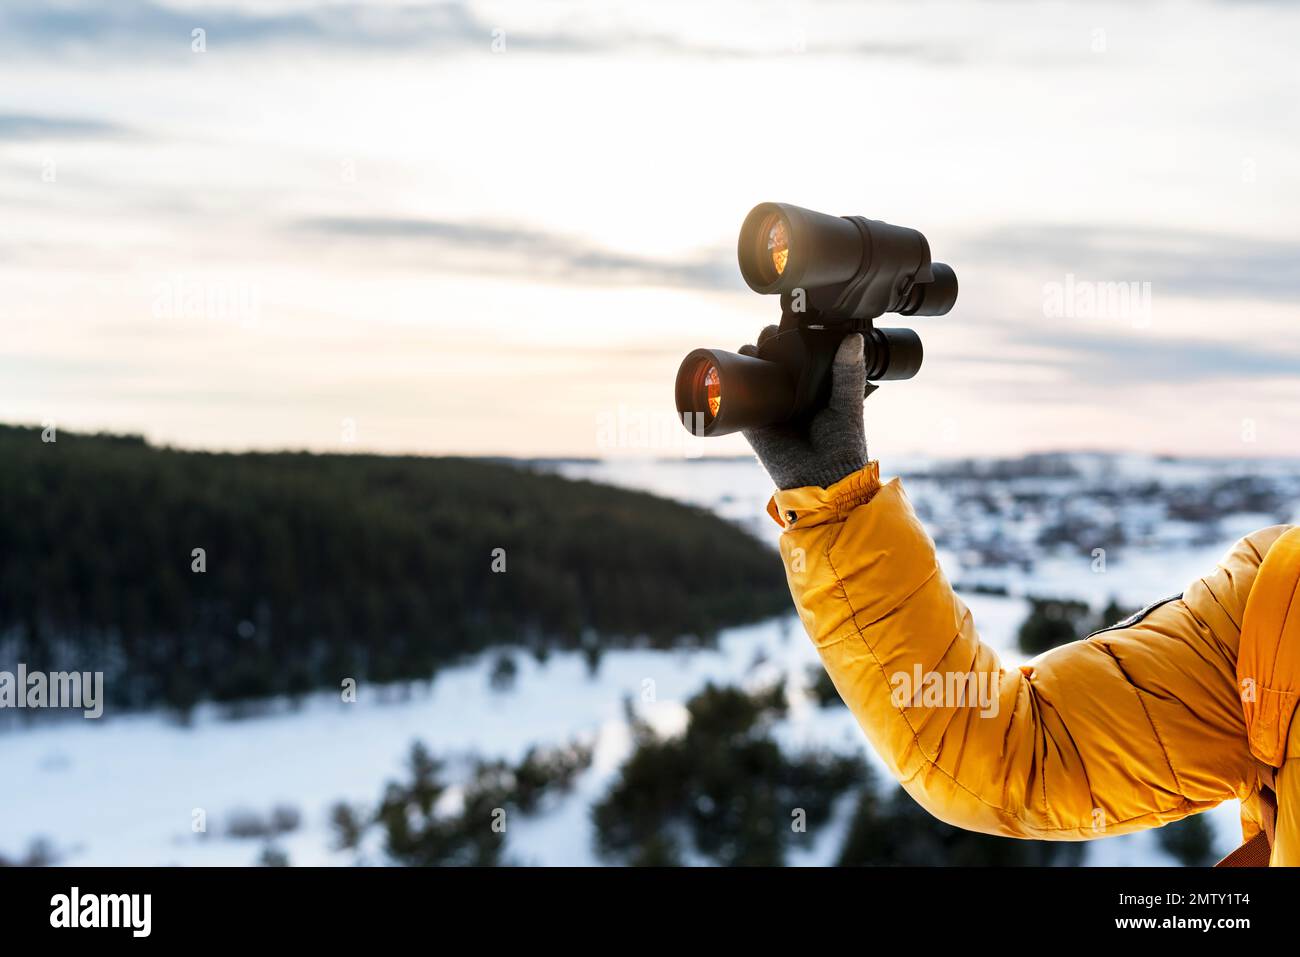 human hand in yellow jacket and warm glove holding binoculars againstwinter forest view of snowy river and sky Birdwatching ecology Research in nature Stock Photo